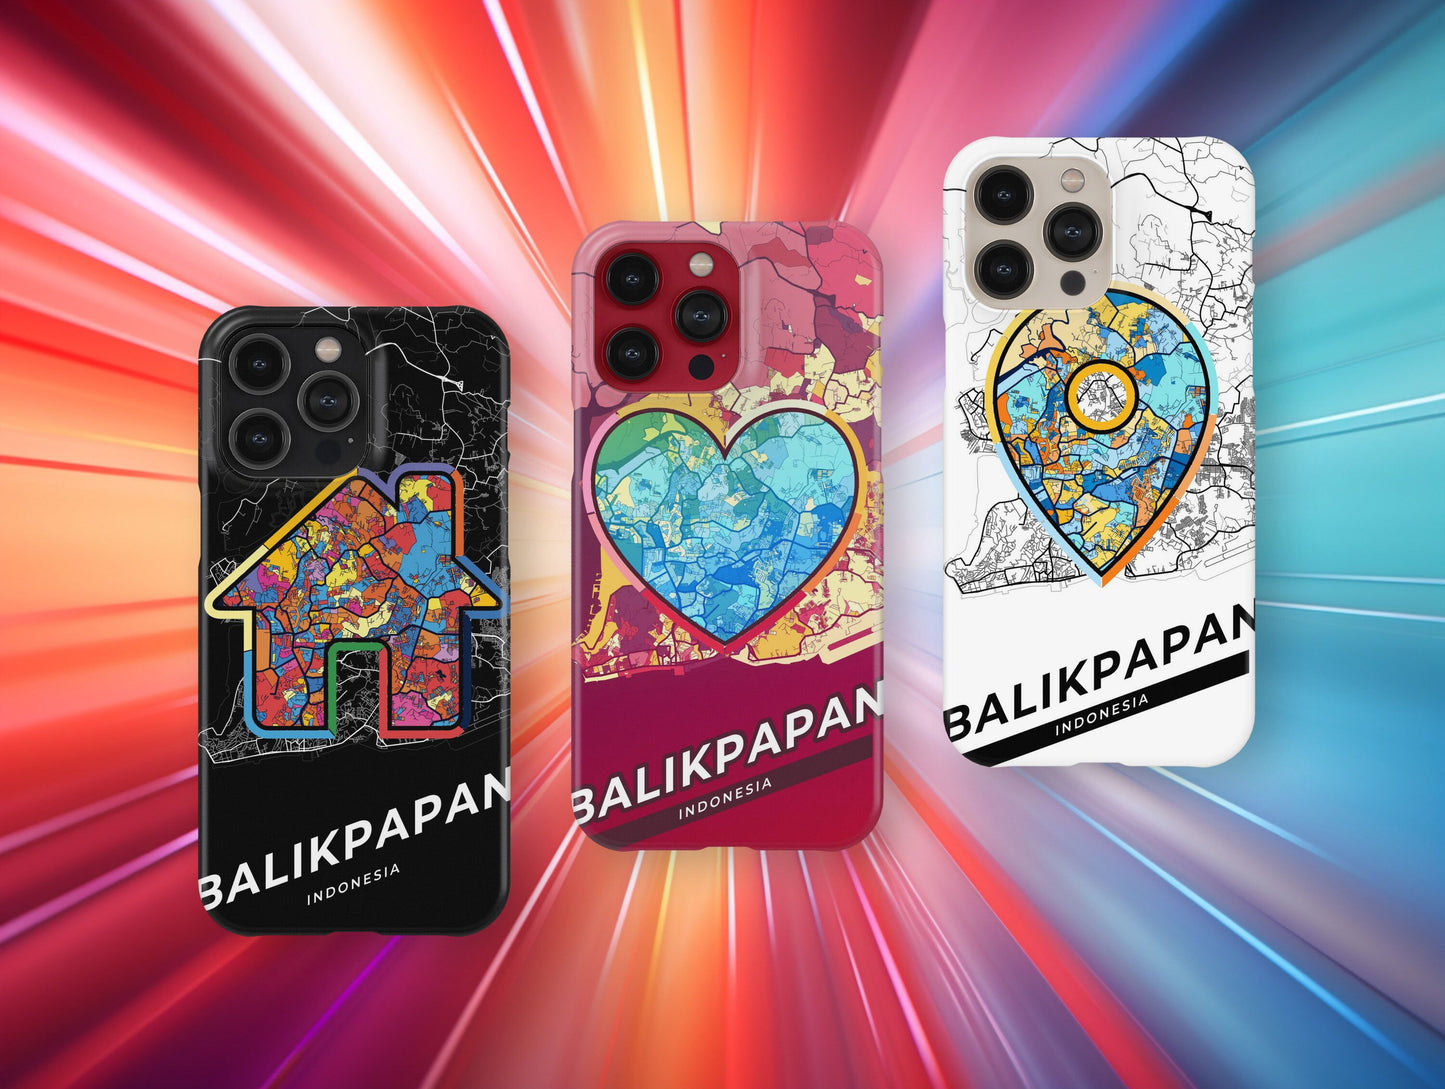 Balikpapan Indonesia slim phone case with colorful icon. Birthday, wedding or housewarming gift. Couple match cases.